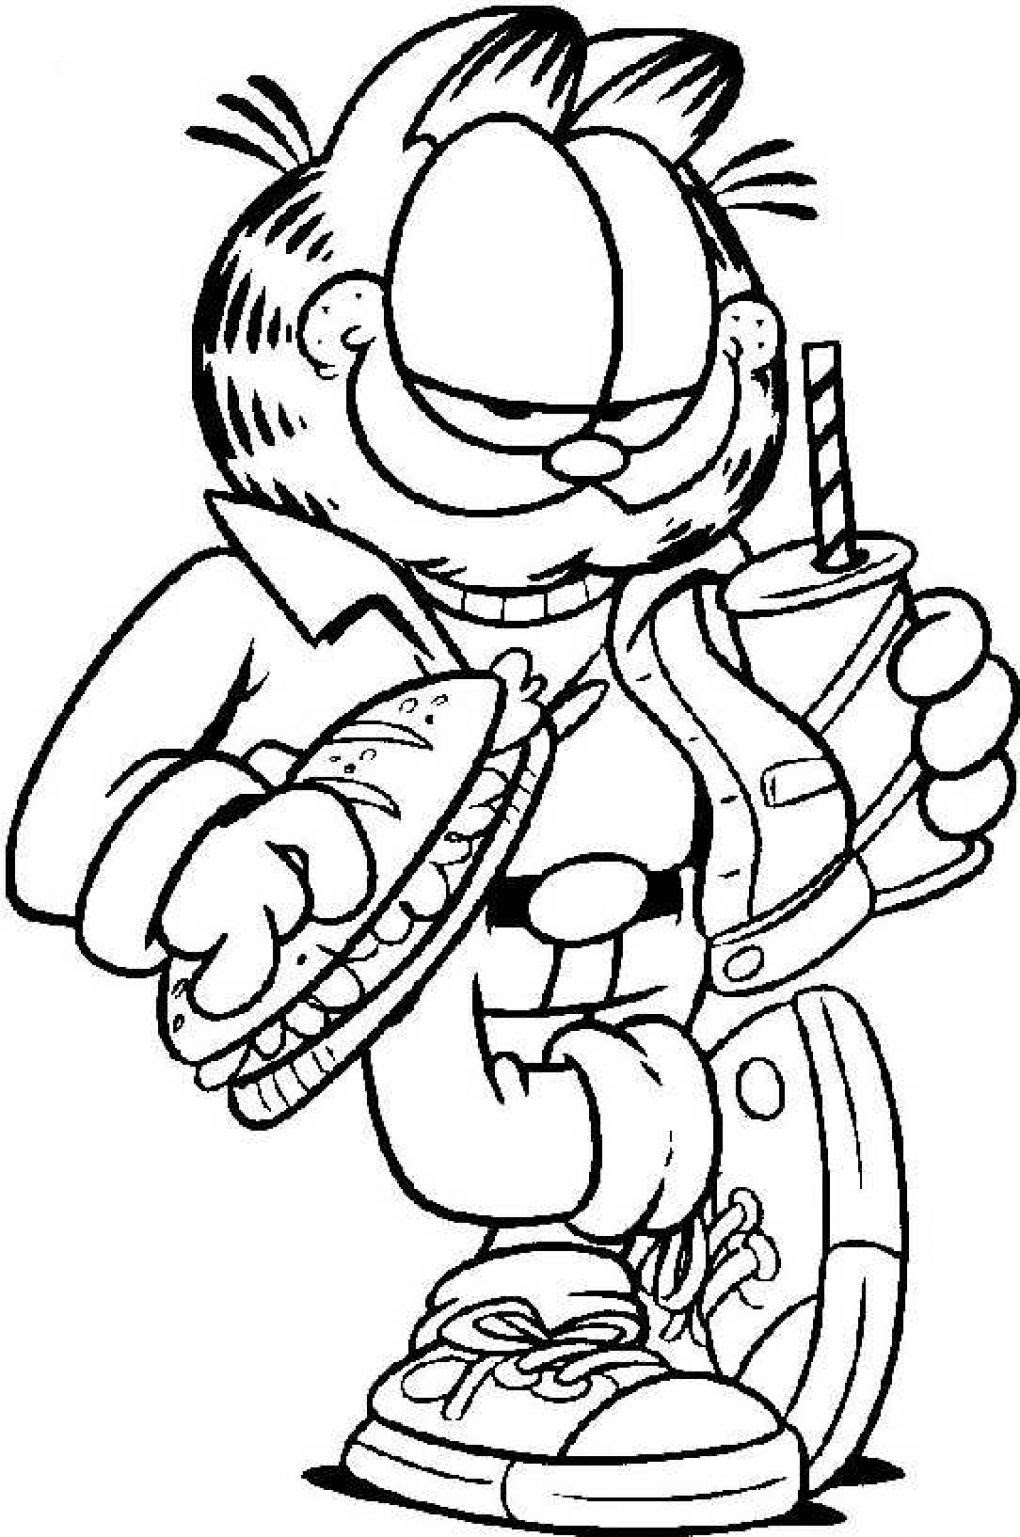 Download Garfield coloring pages to download and print for free